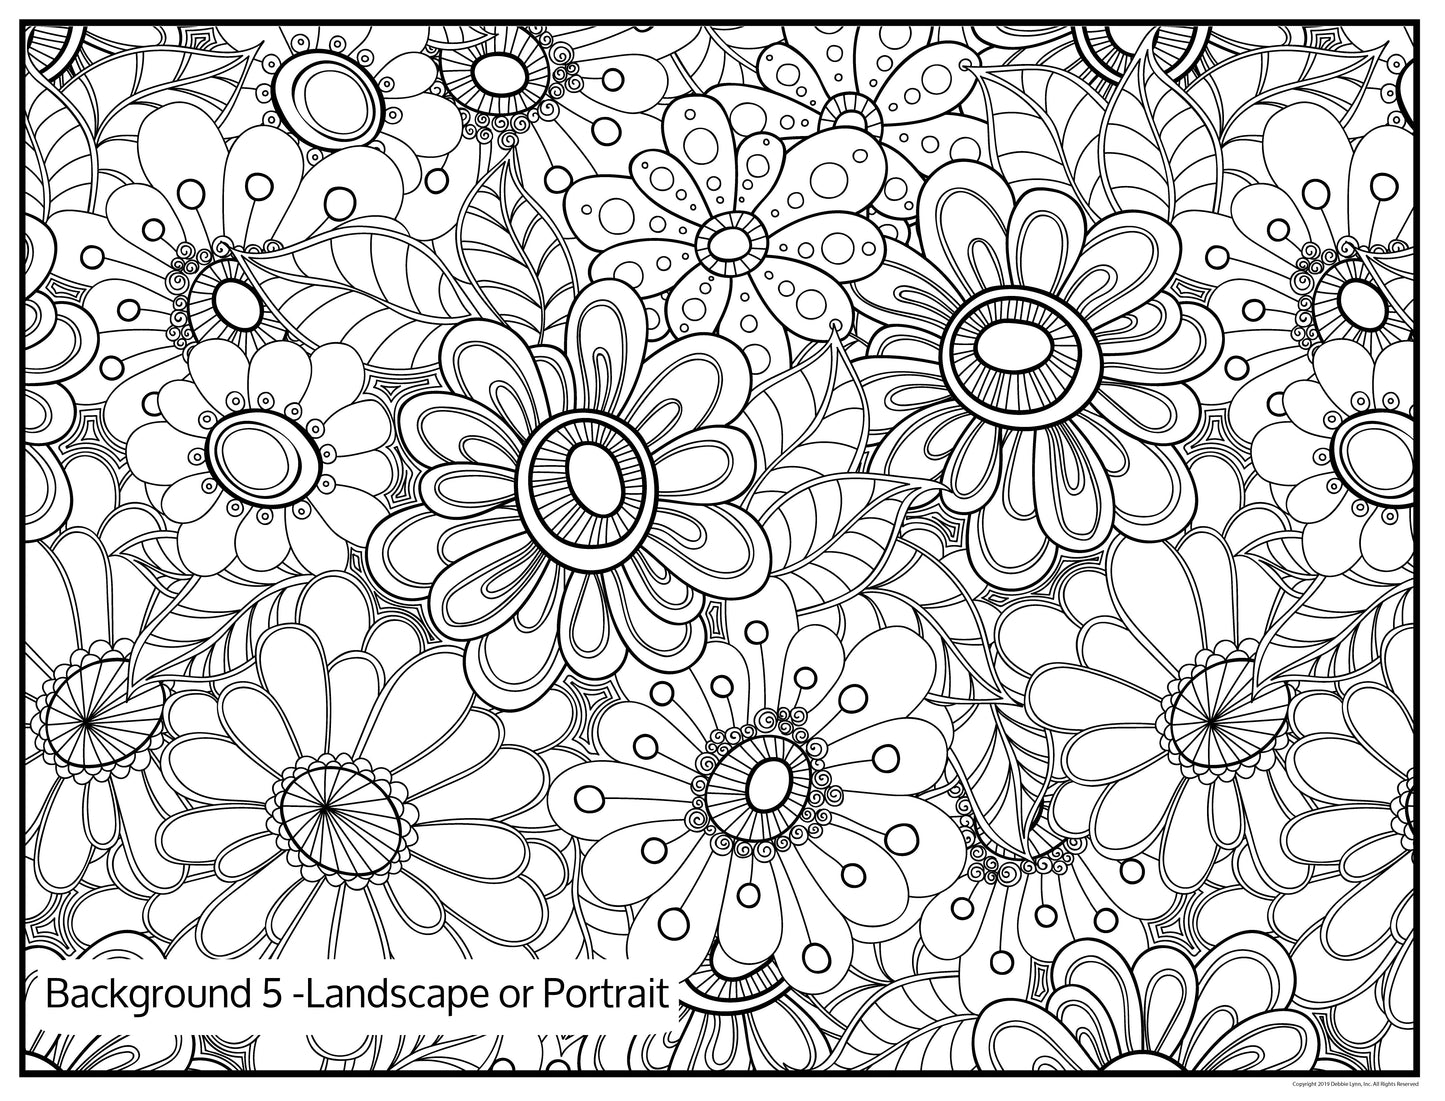 Background 5 Custom Personalized Giant Coloring Poster 46"x60"